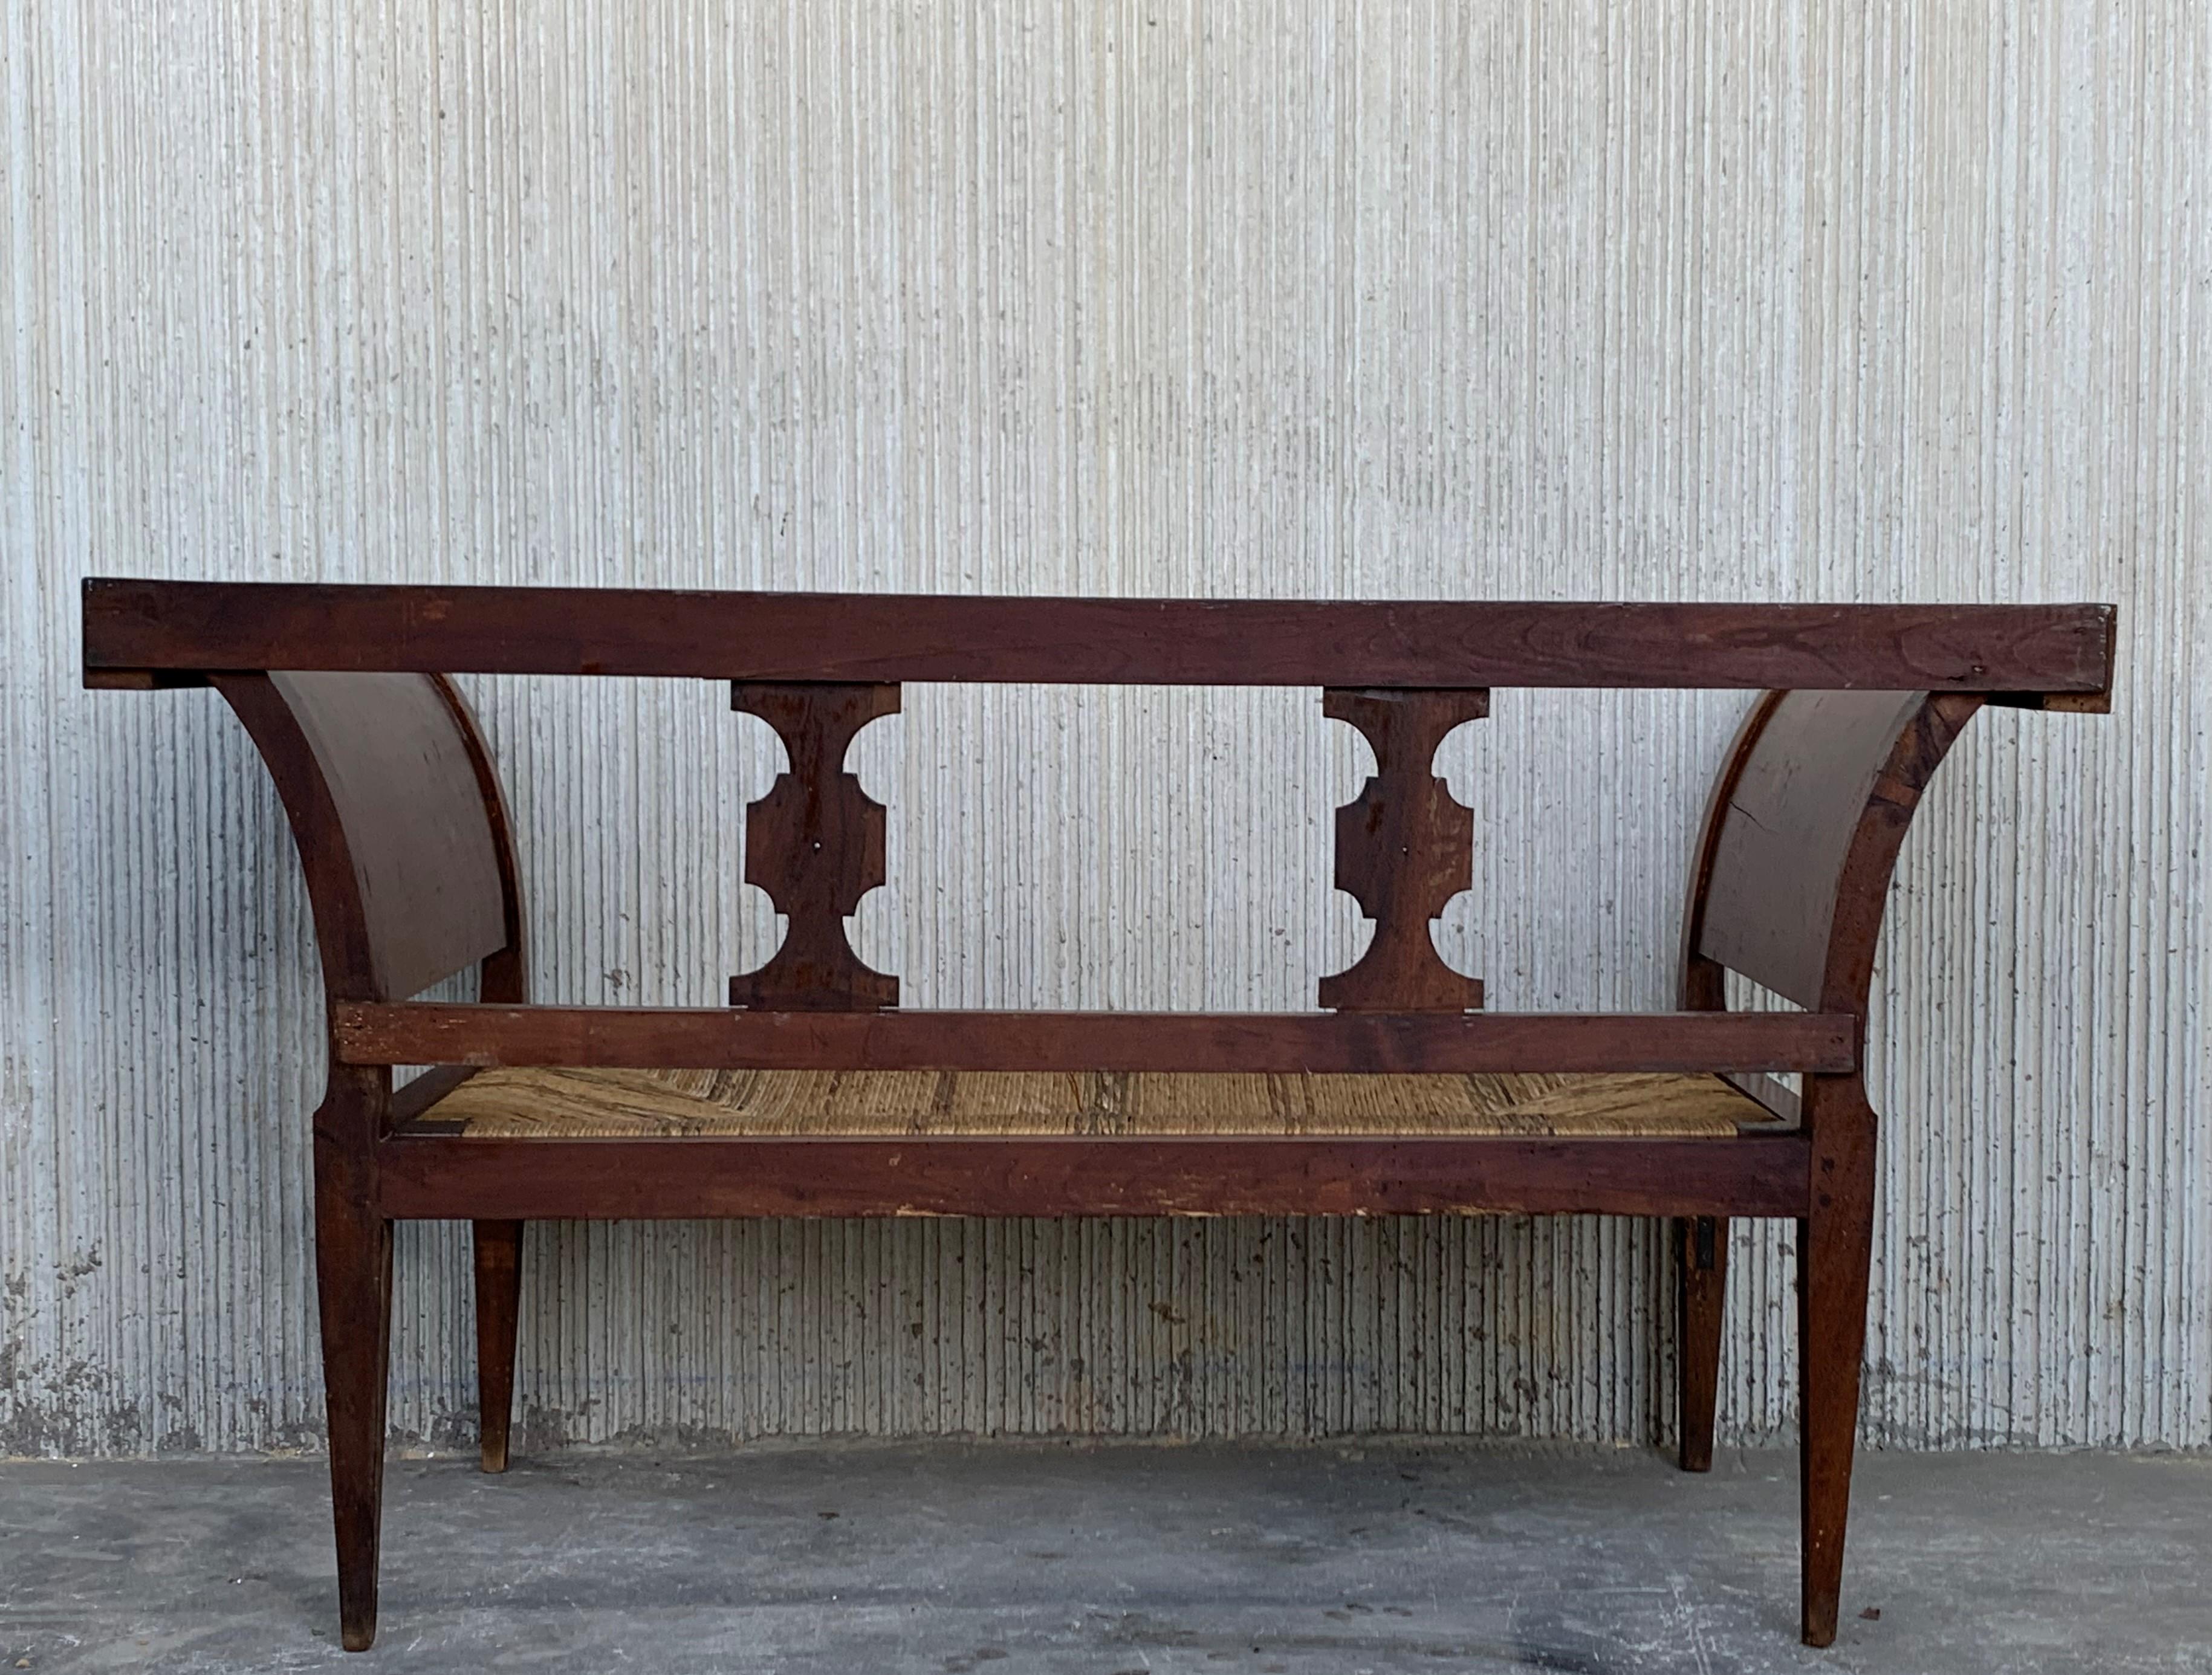 20th Century Empire Bench in Walnut with Ebonized Details and Caned Seat 1